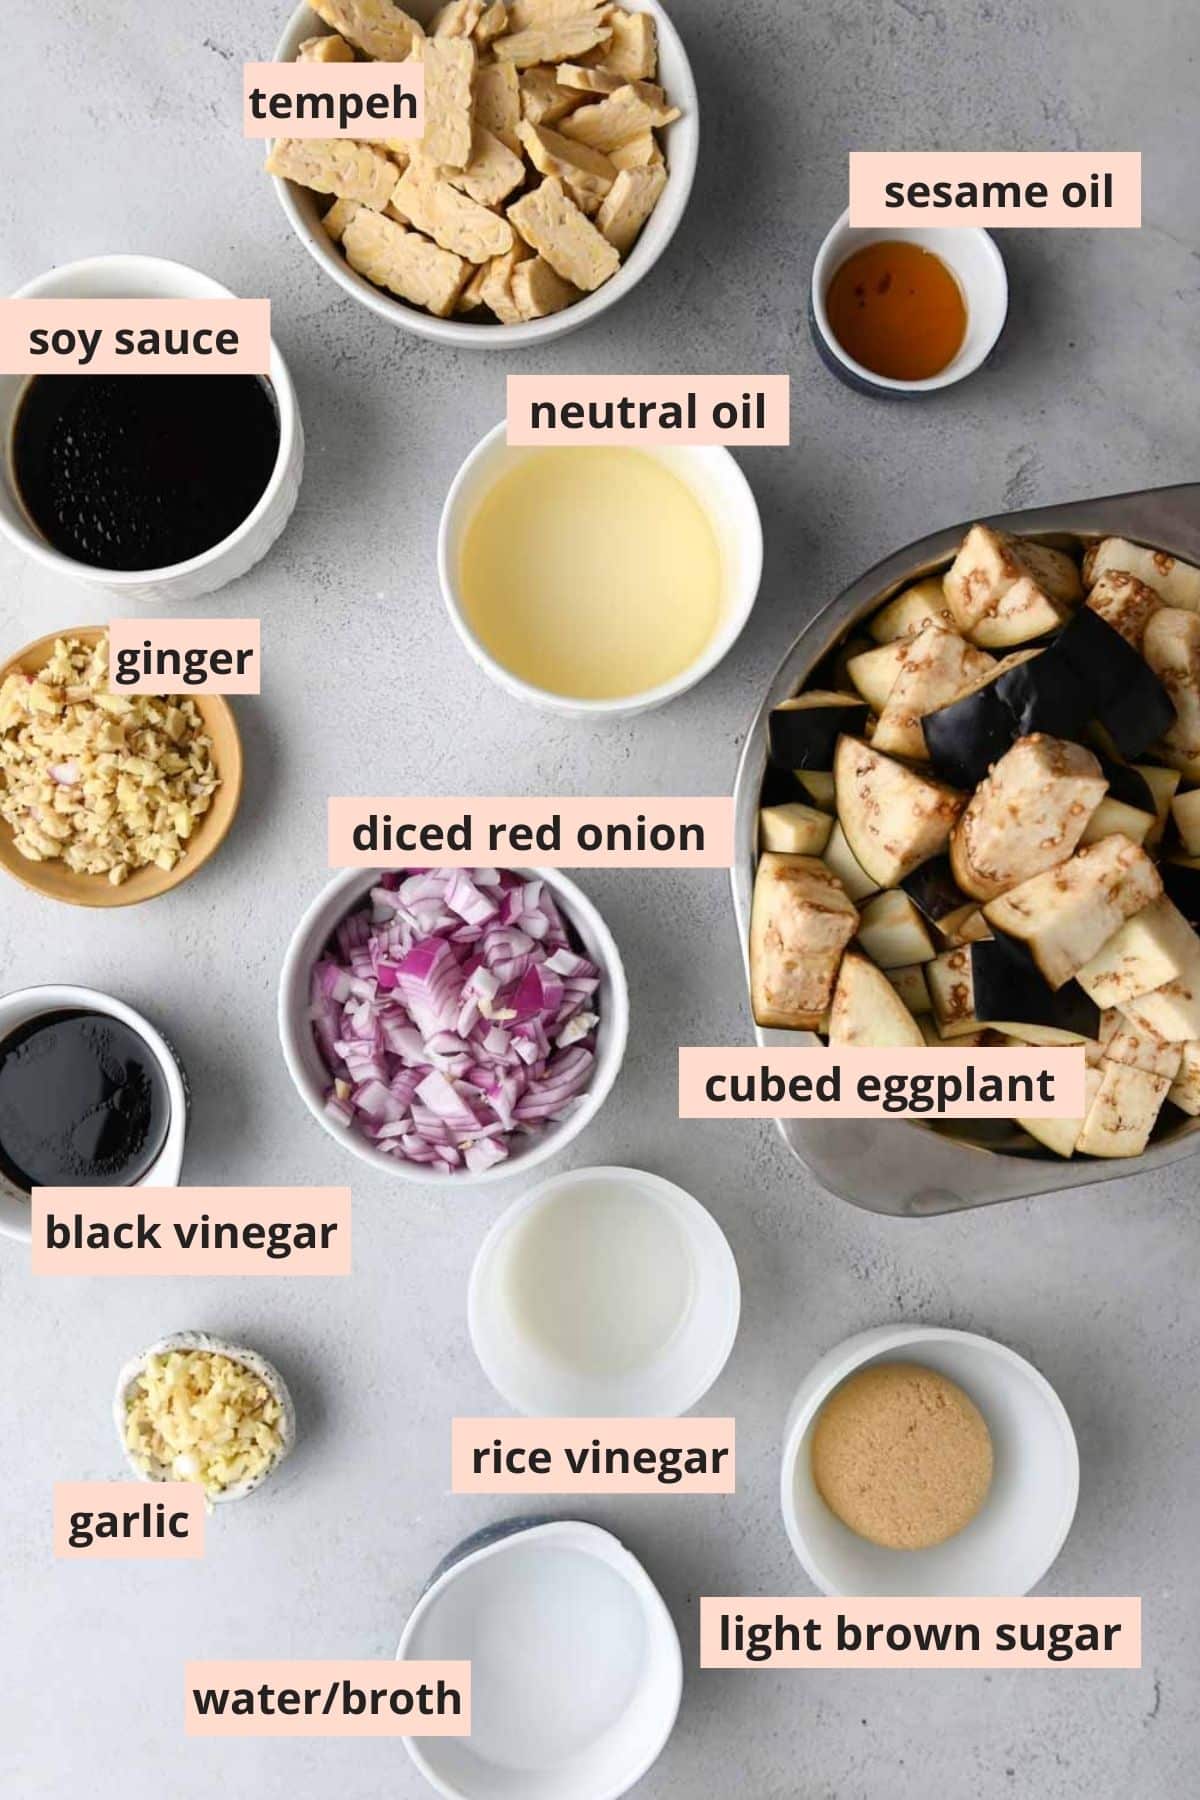 Labeled ingredients used to make the recipe.